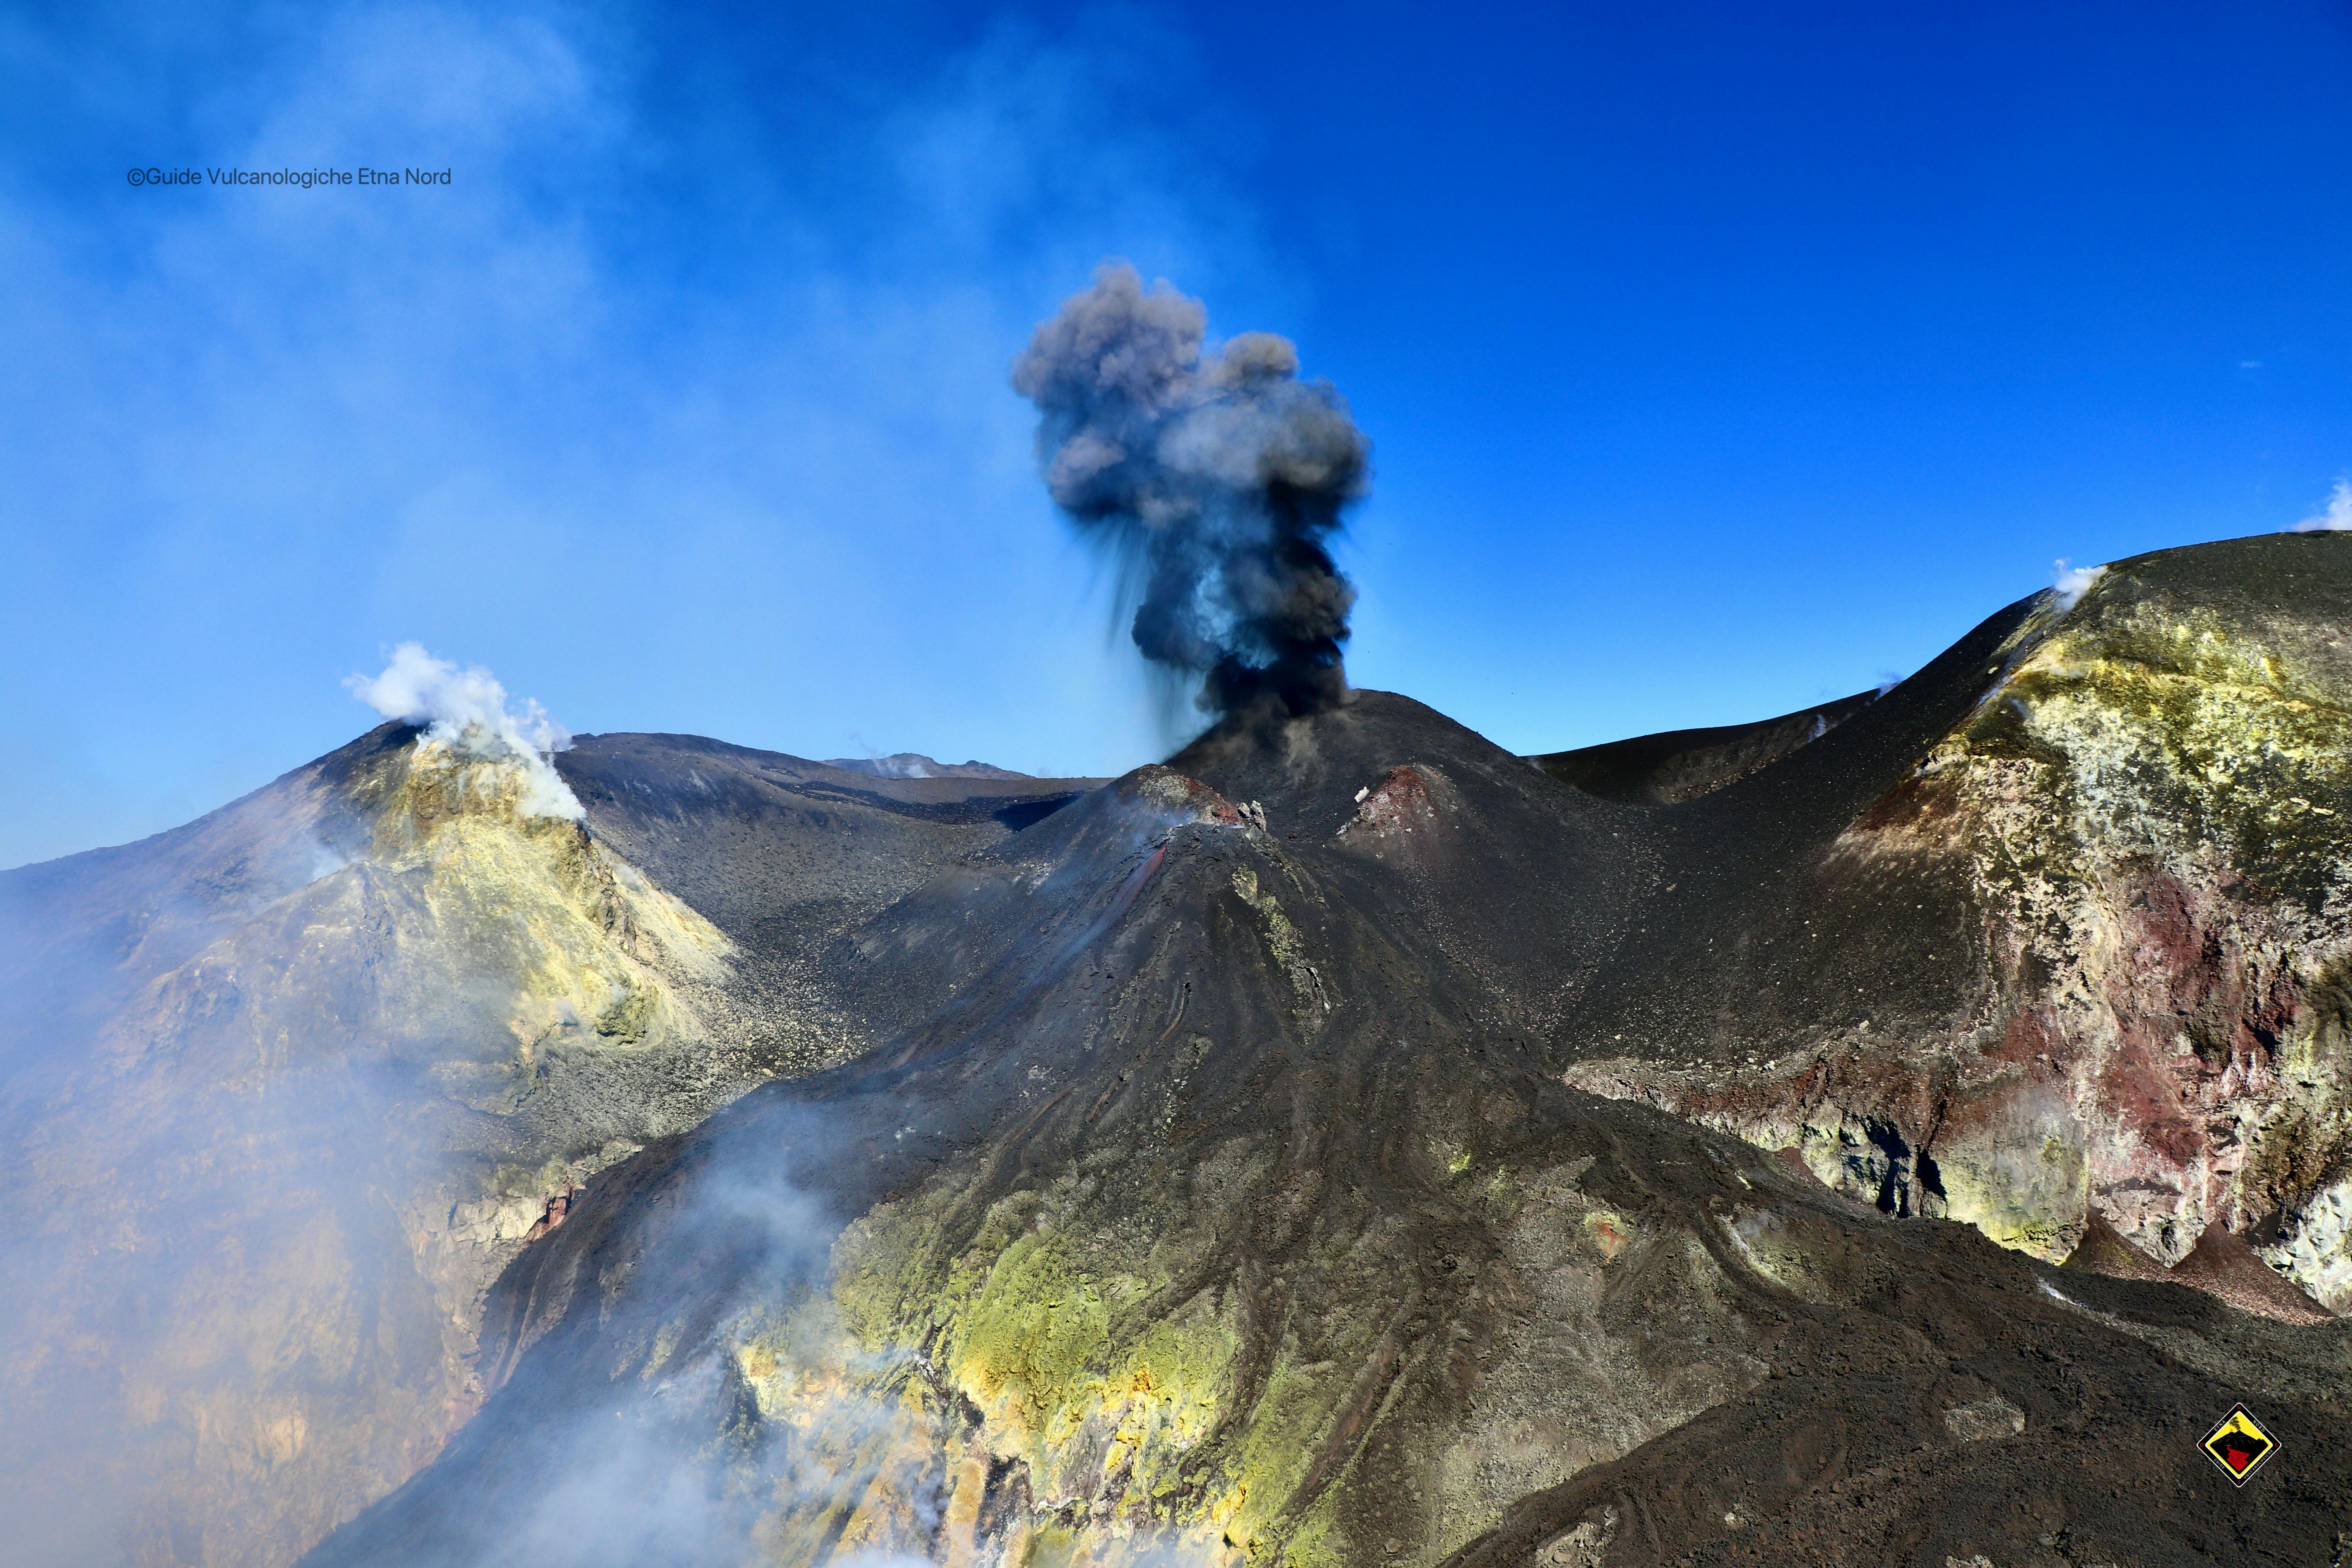 Excursion to the Top of Mt. Etna with Trekking and 4x4